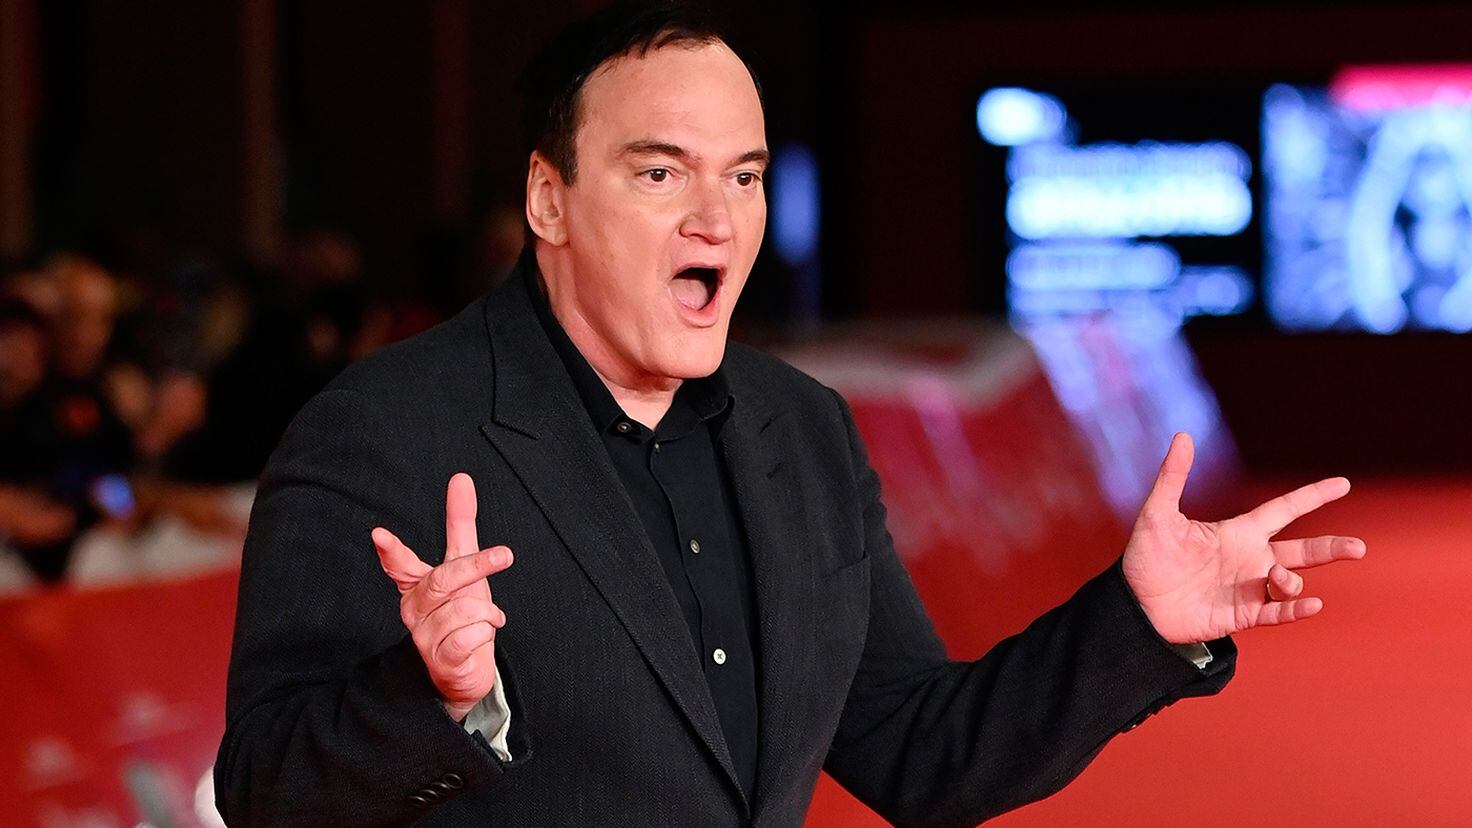 Quentin Tarantino will host a secret screening at Cannes - AS USA